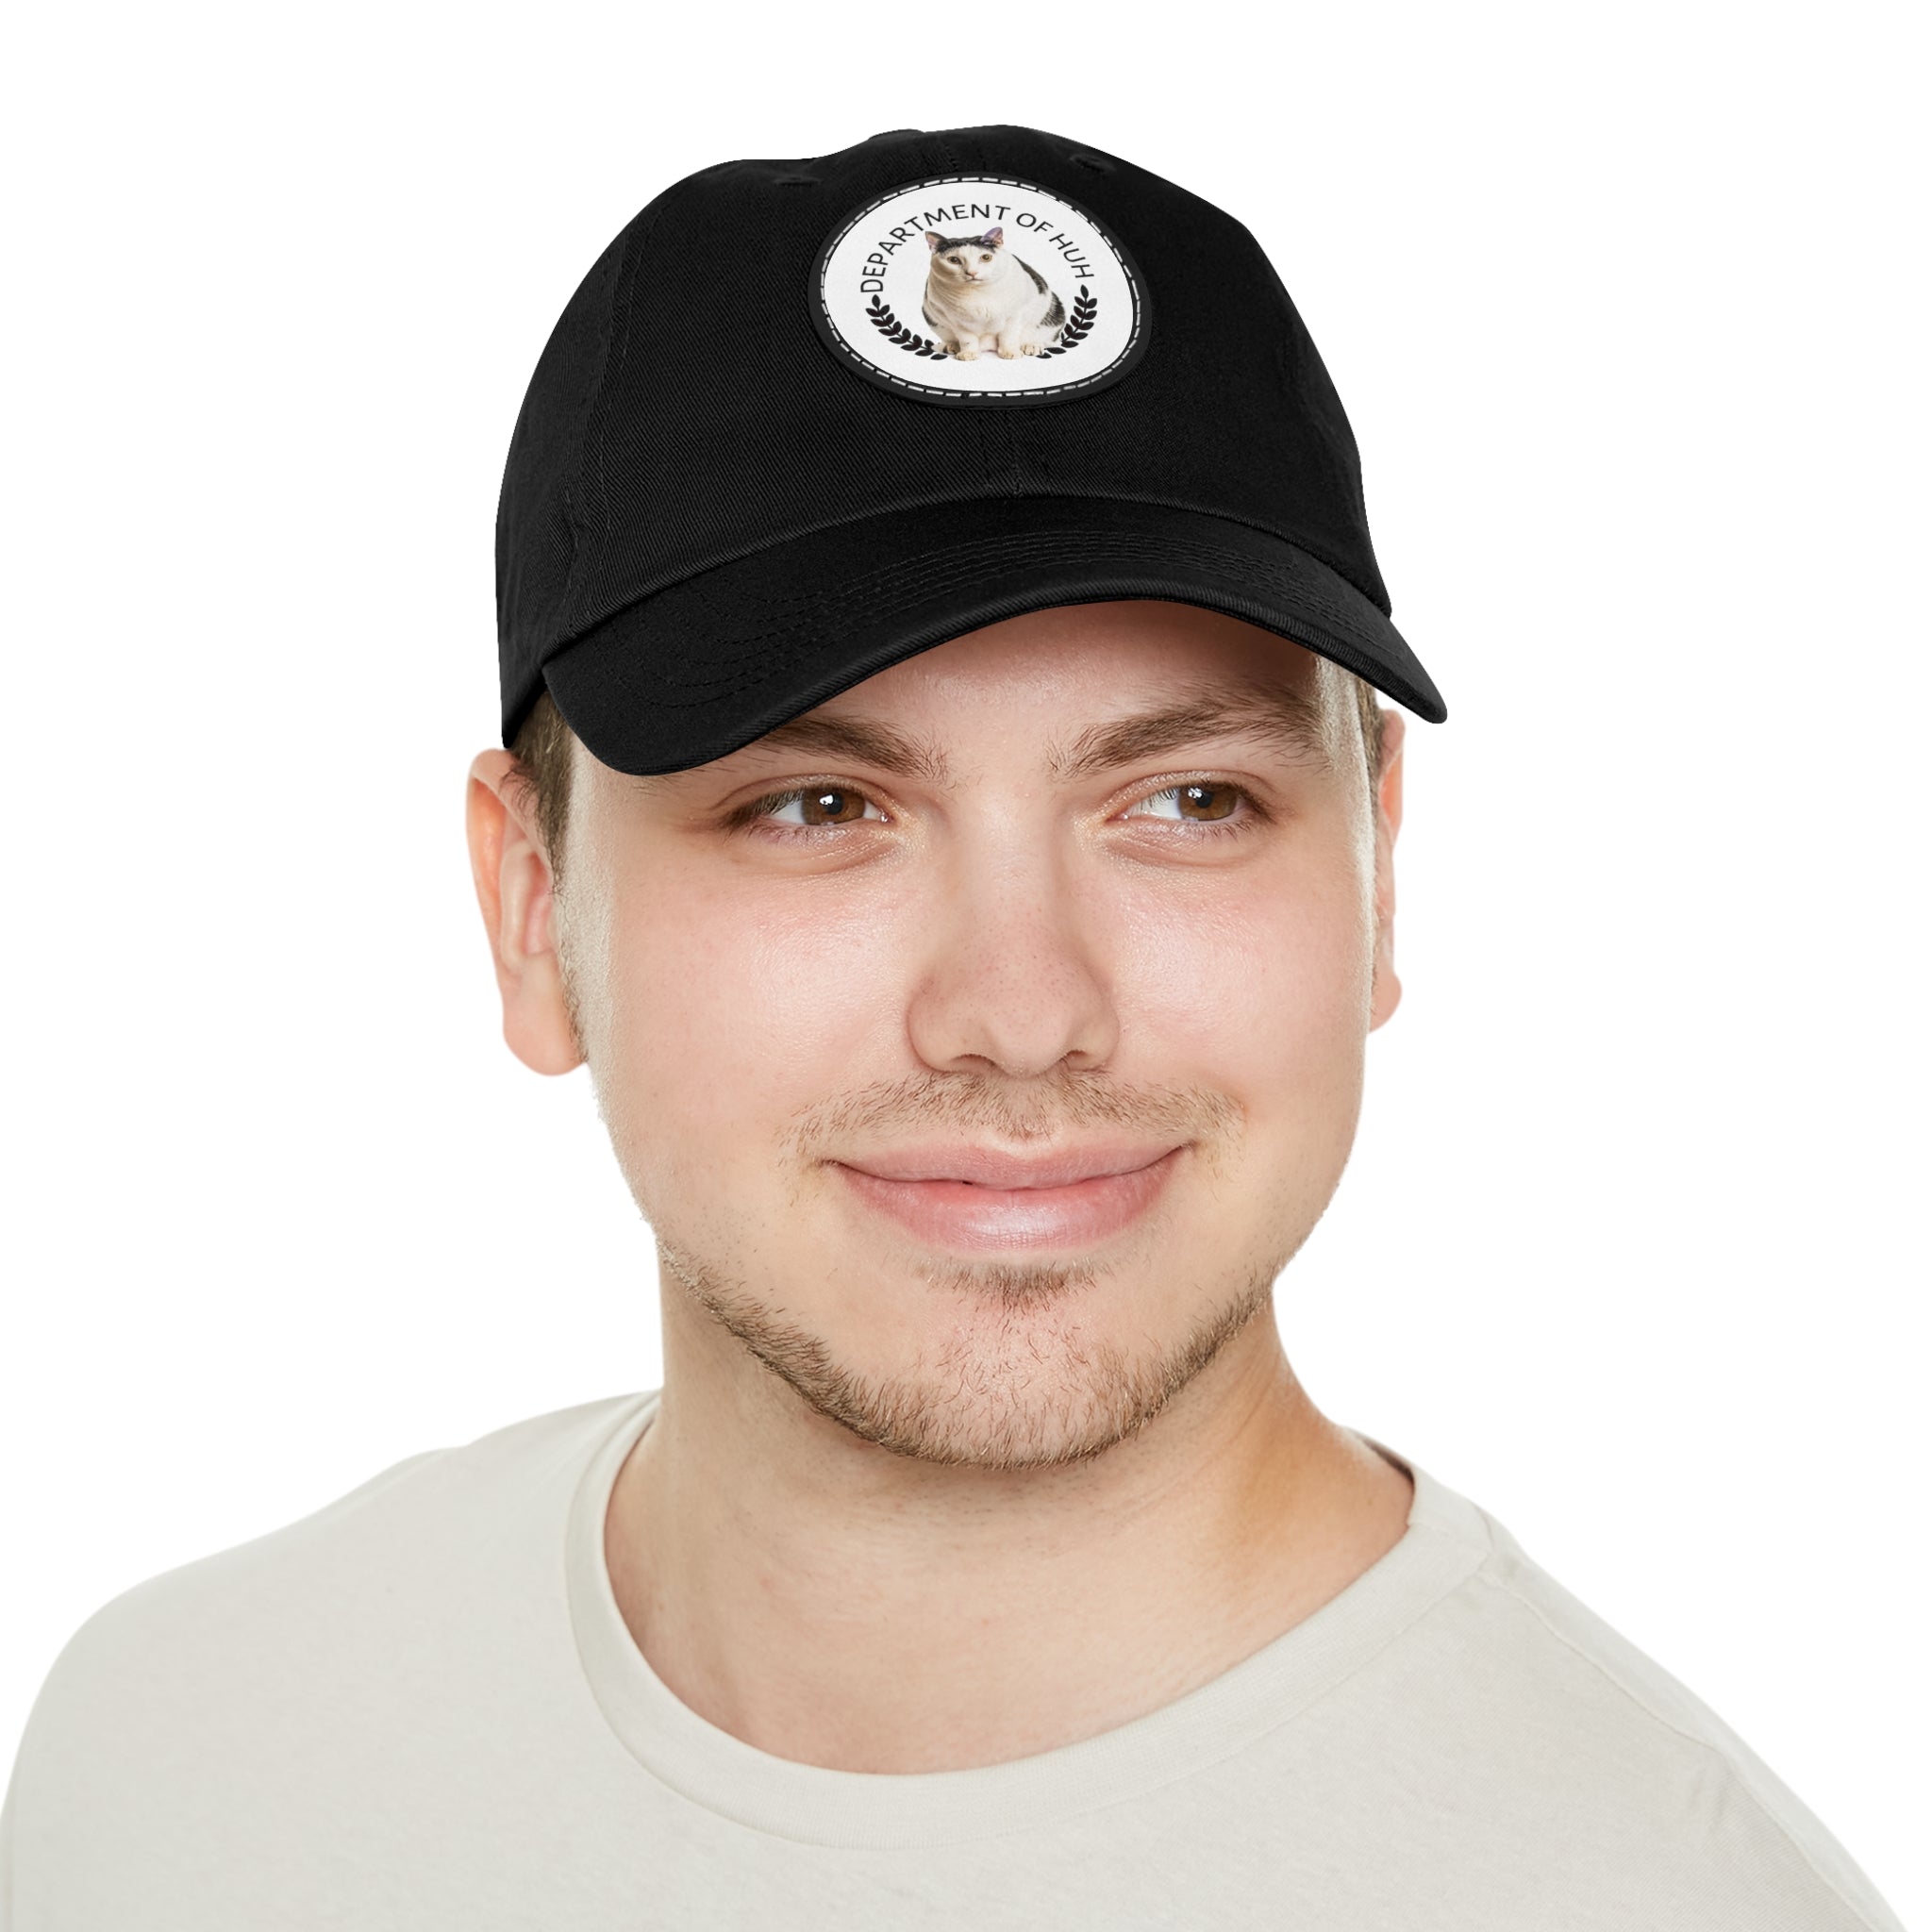 Department of HUH Cat Dad Hat with Leather Patch (Round)